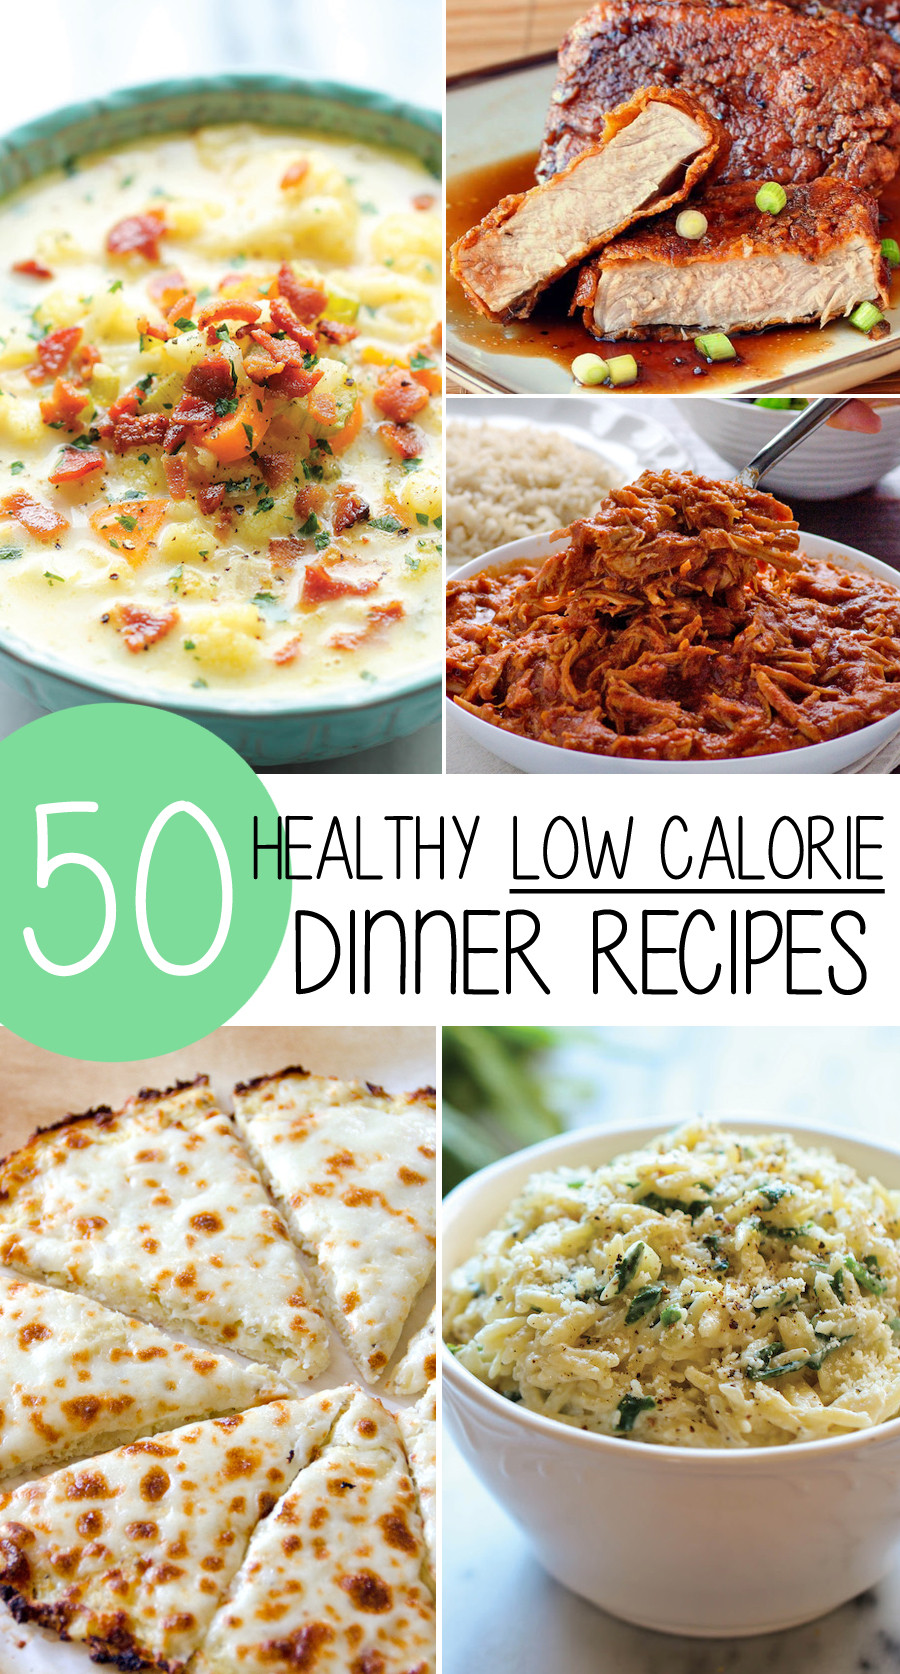 Healthy Low Calorie Dinner Recipes
 50 Healthy Low Calorie Weight Loss Dinner Recipes